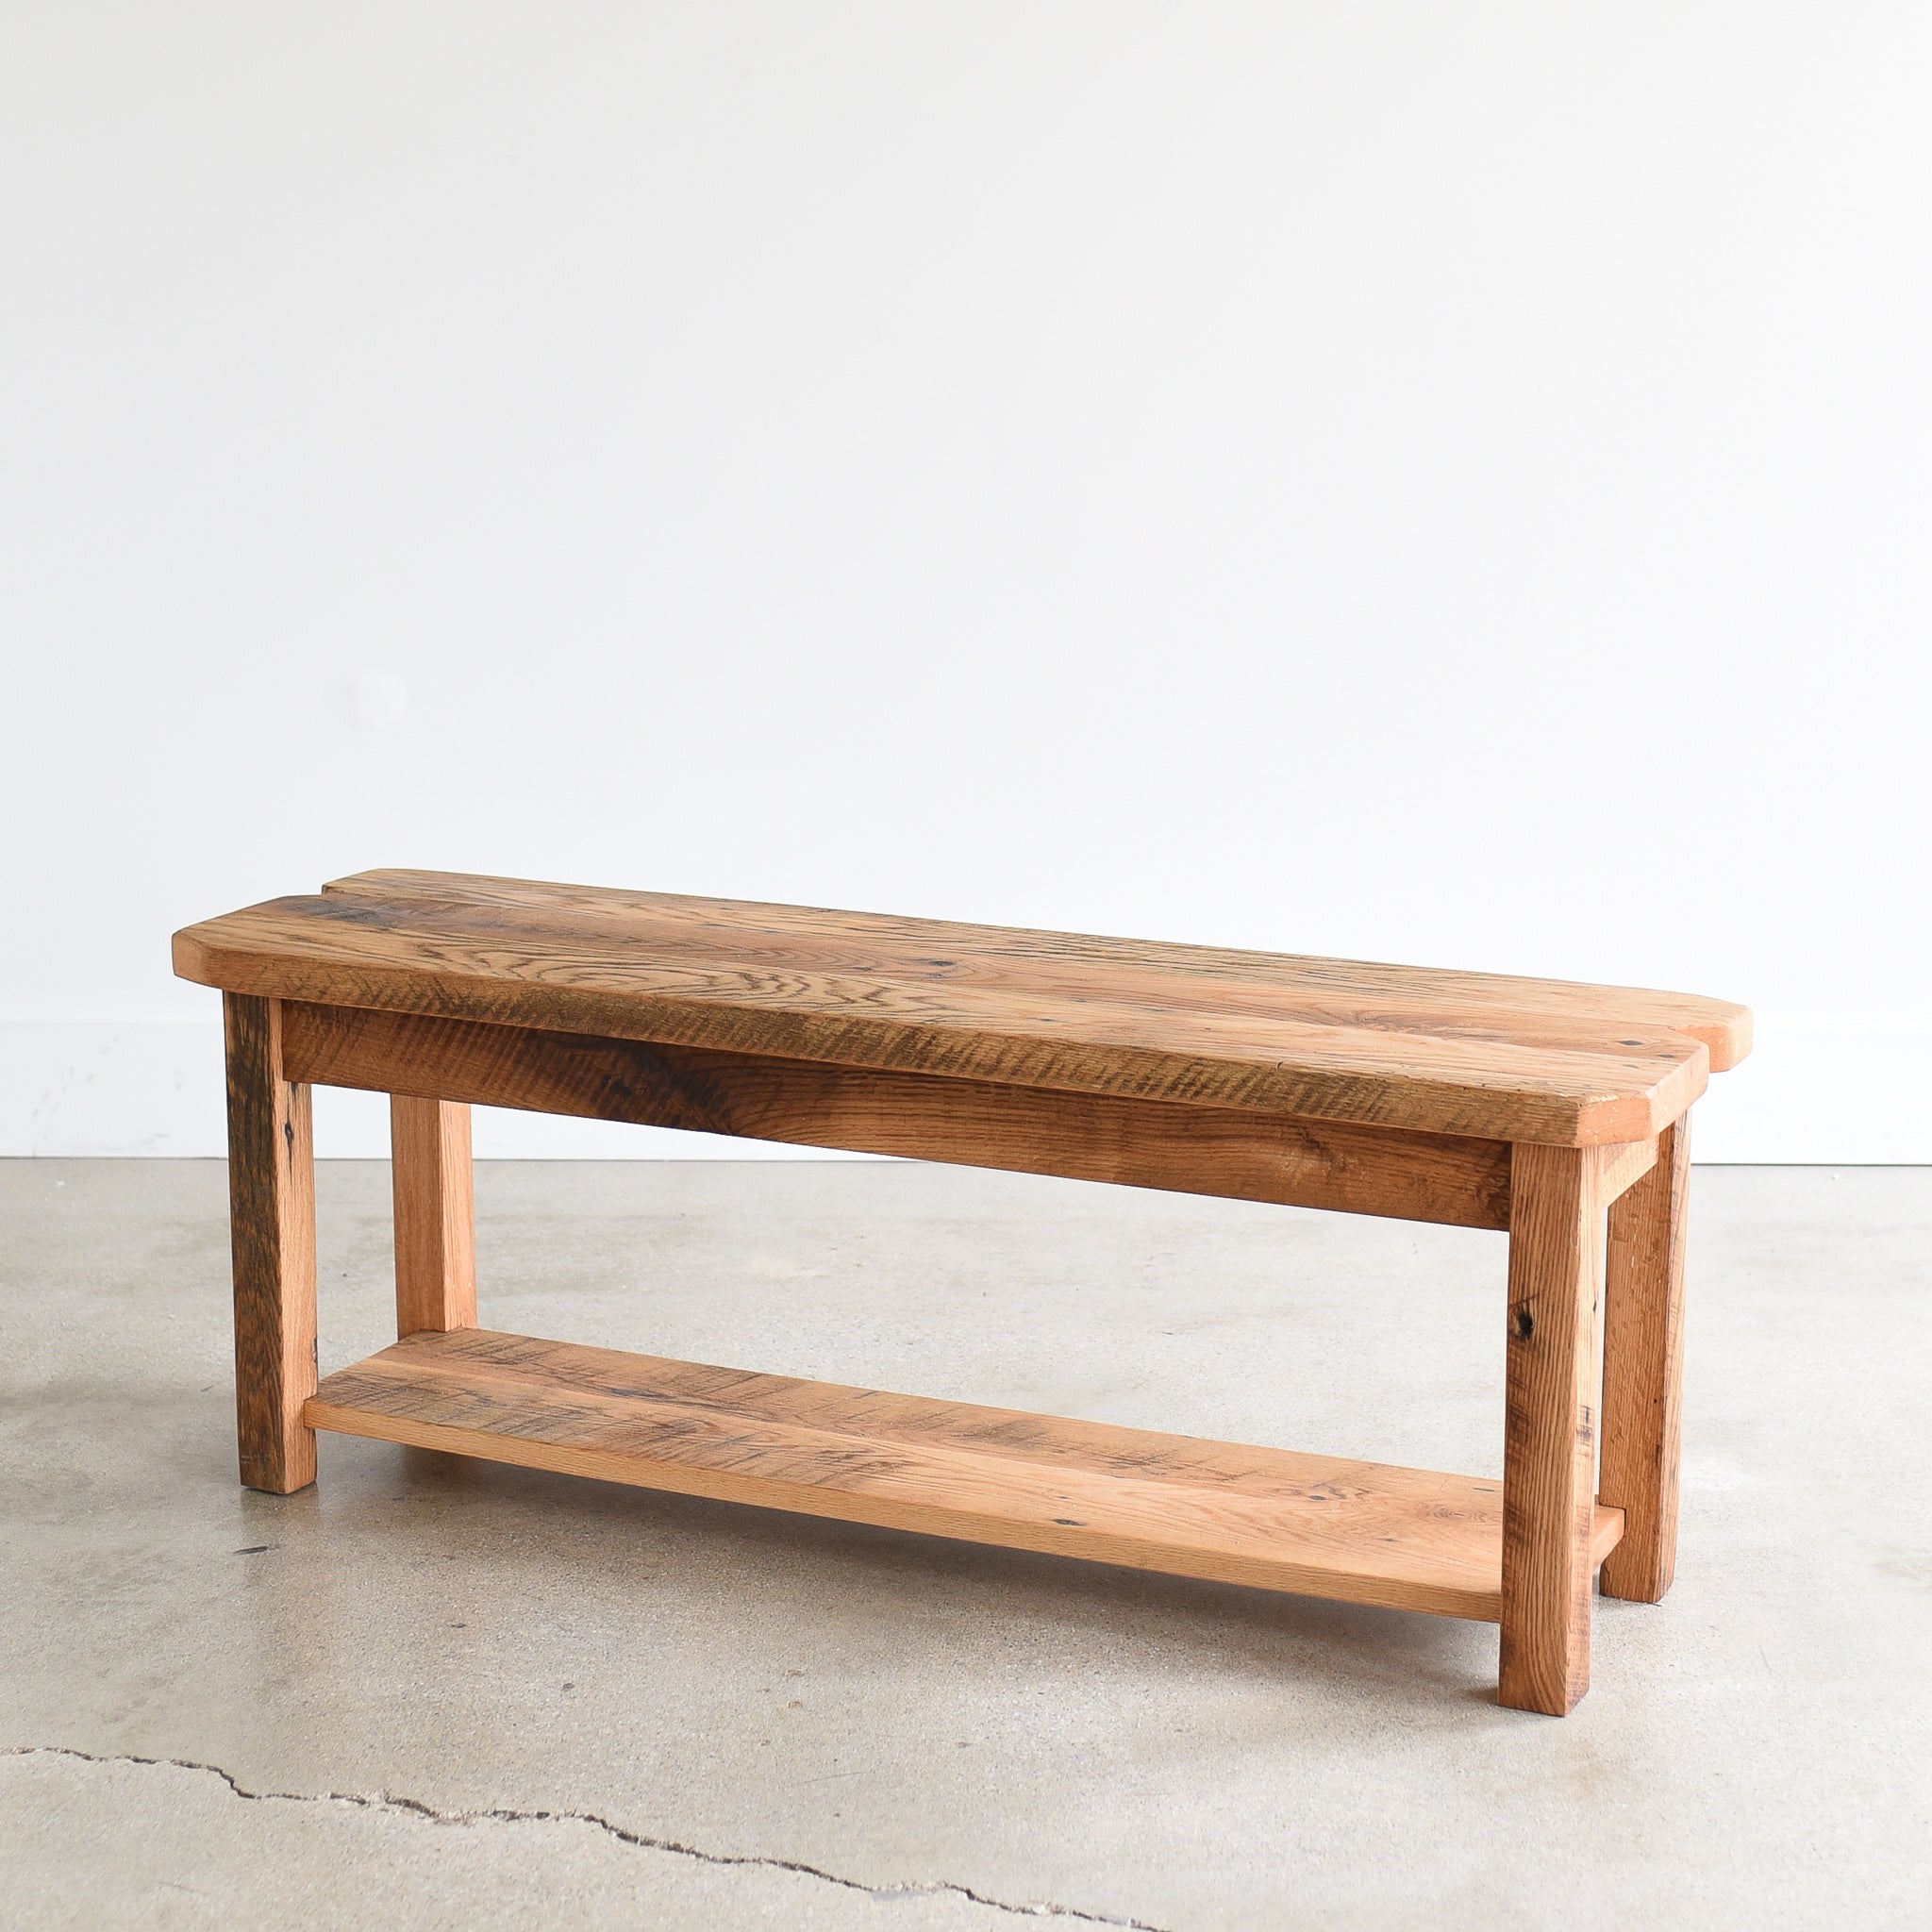 Farmhouse Bench with Lower Shelf - Specifications: